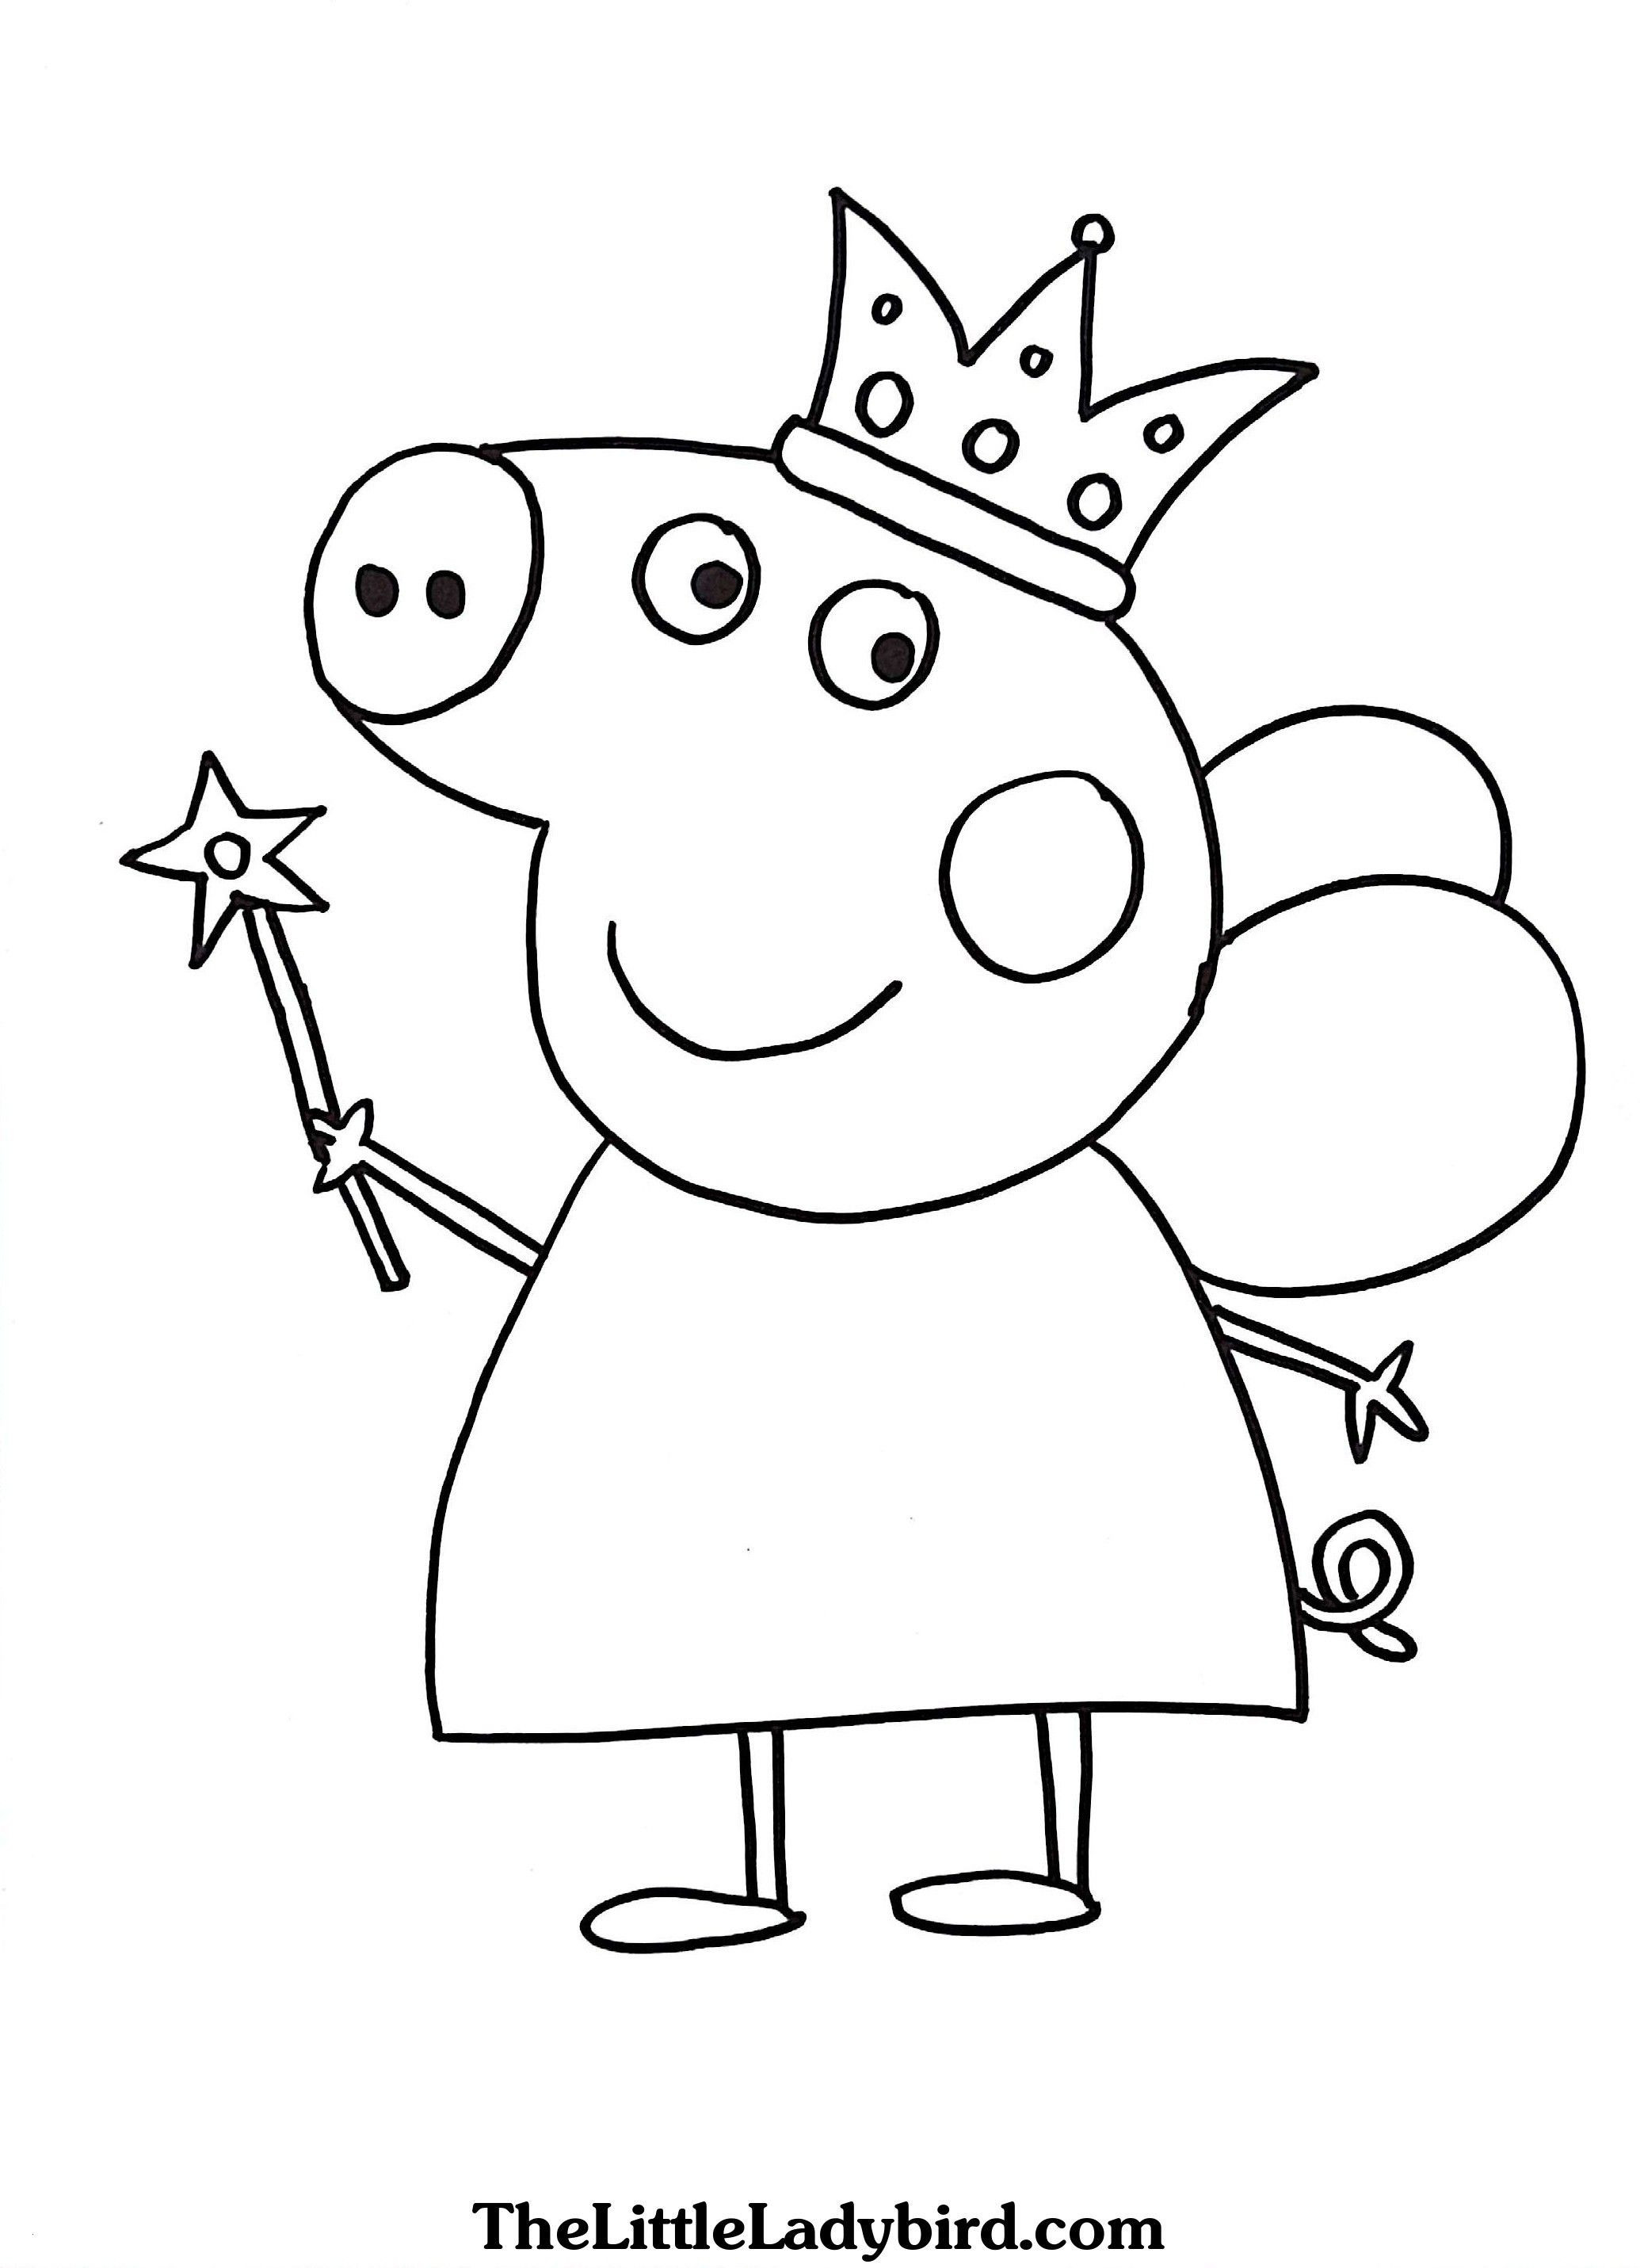 Peppa Pig Halloween Coloring Pages
 Peppa Pig Valentines Coloring Pages – From the thousand